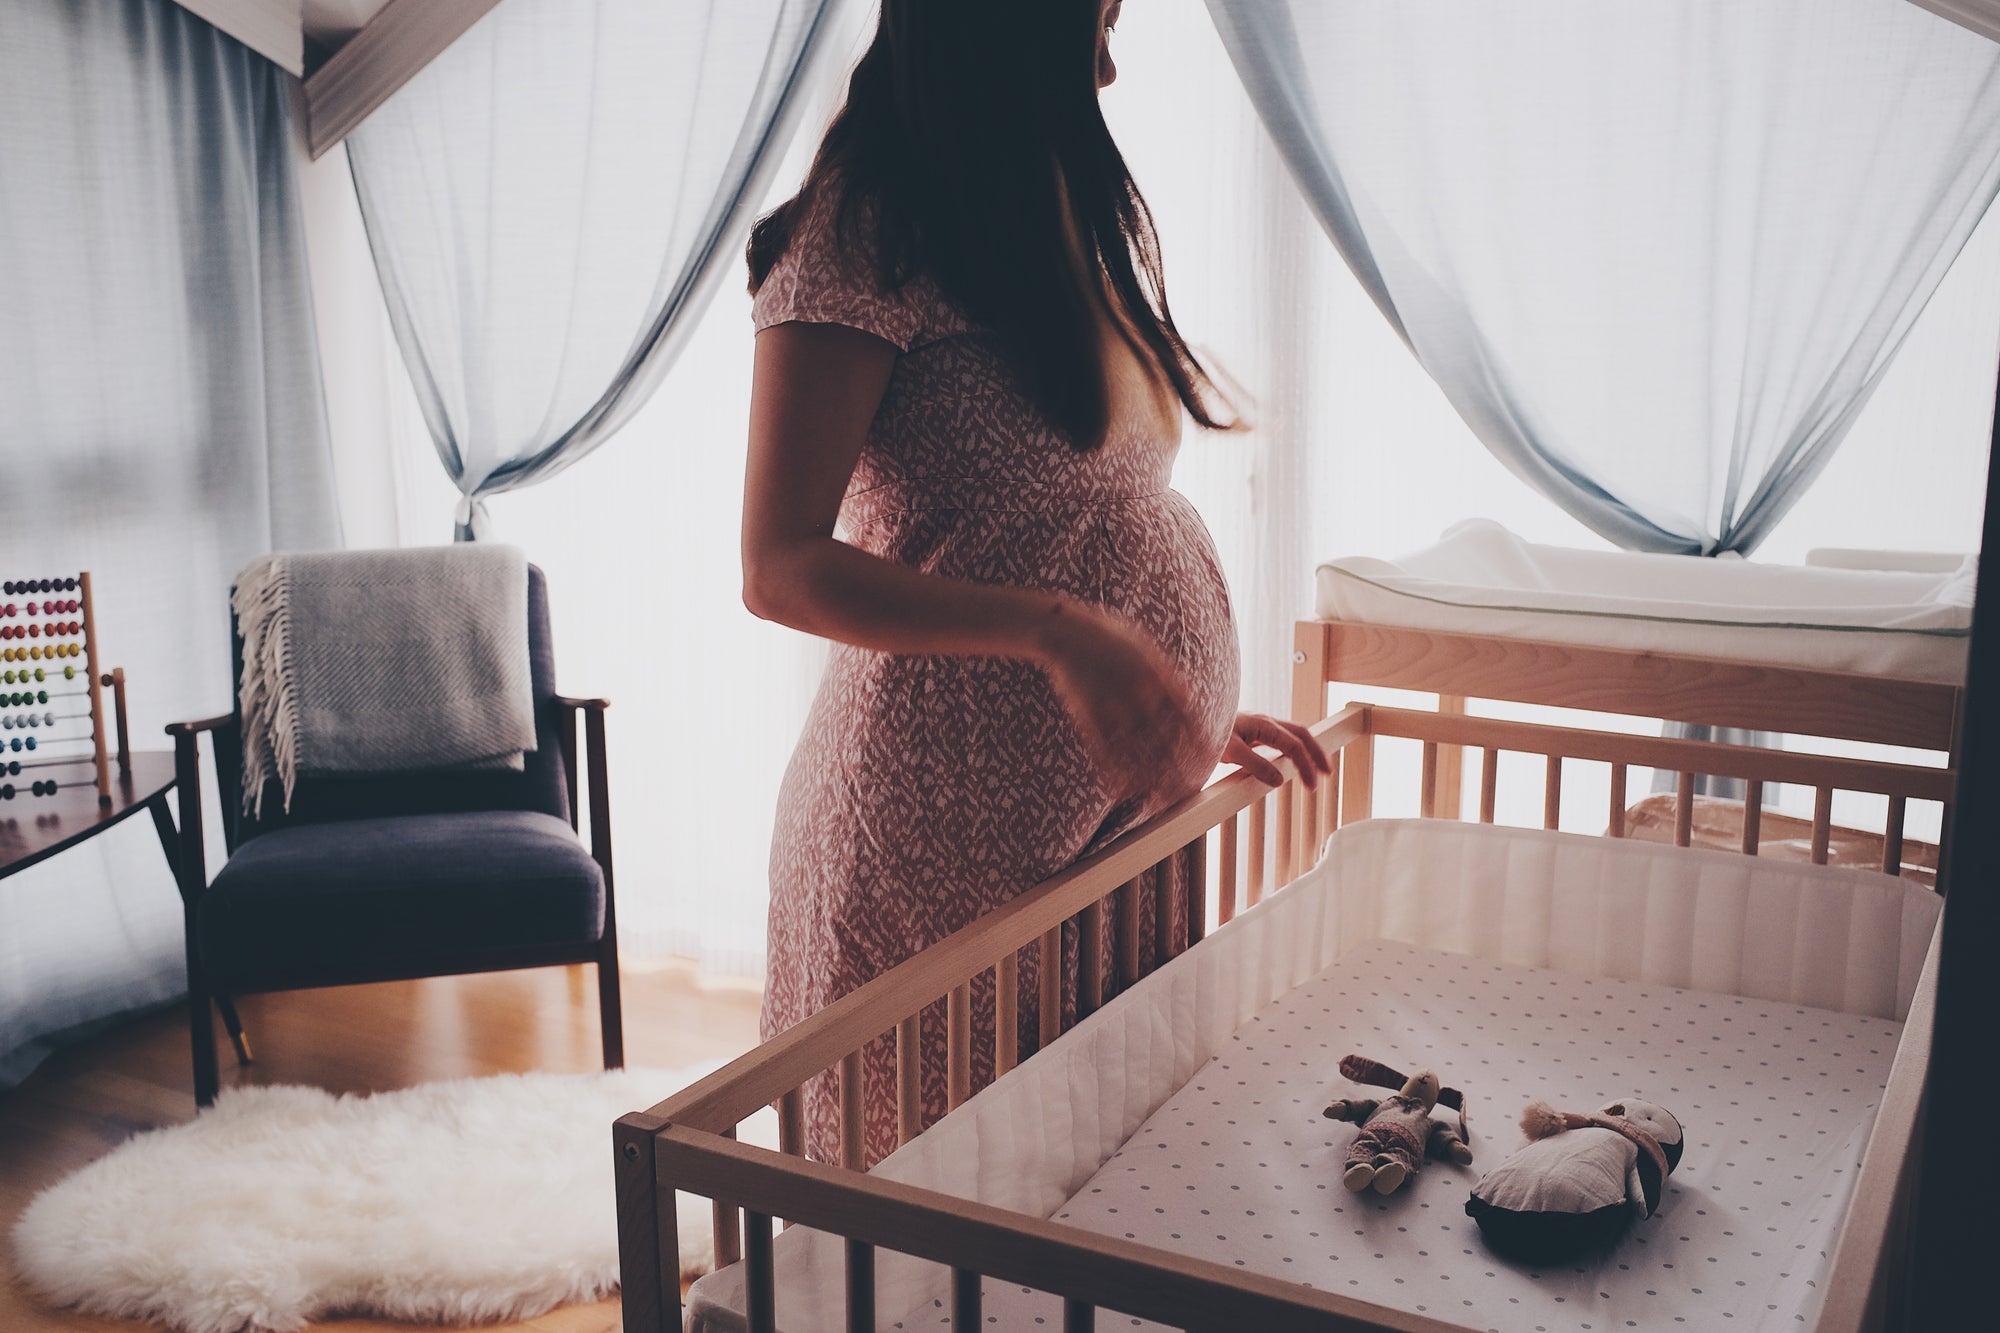 Caring for Your Mental Health During Pregnancy